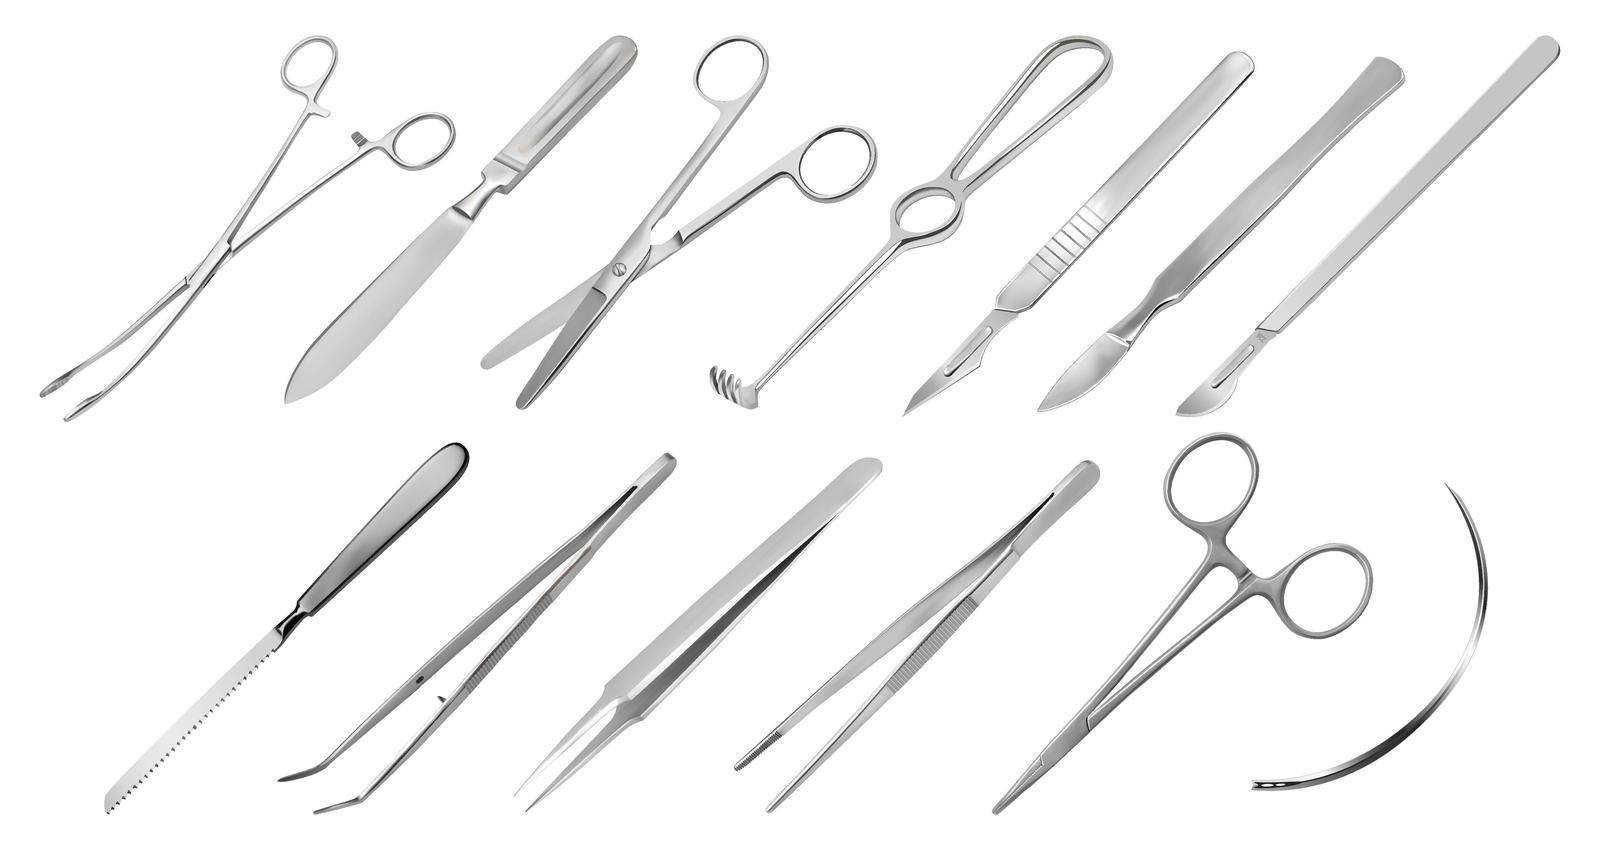 Surgical instruments. Different types of tweezers, scalpels, Liston s amputation knife clip with fastener, straight scissors, Folkmann s jagged hook, Meyer s forceps, surgical needle, Langenbeck saw by Nikolaiev_Oleksii